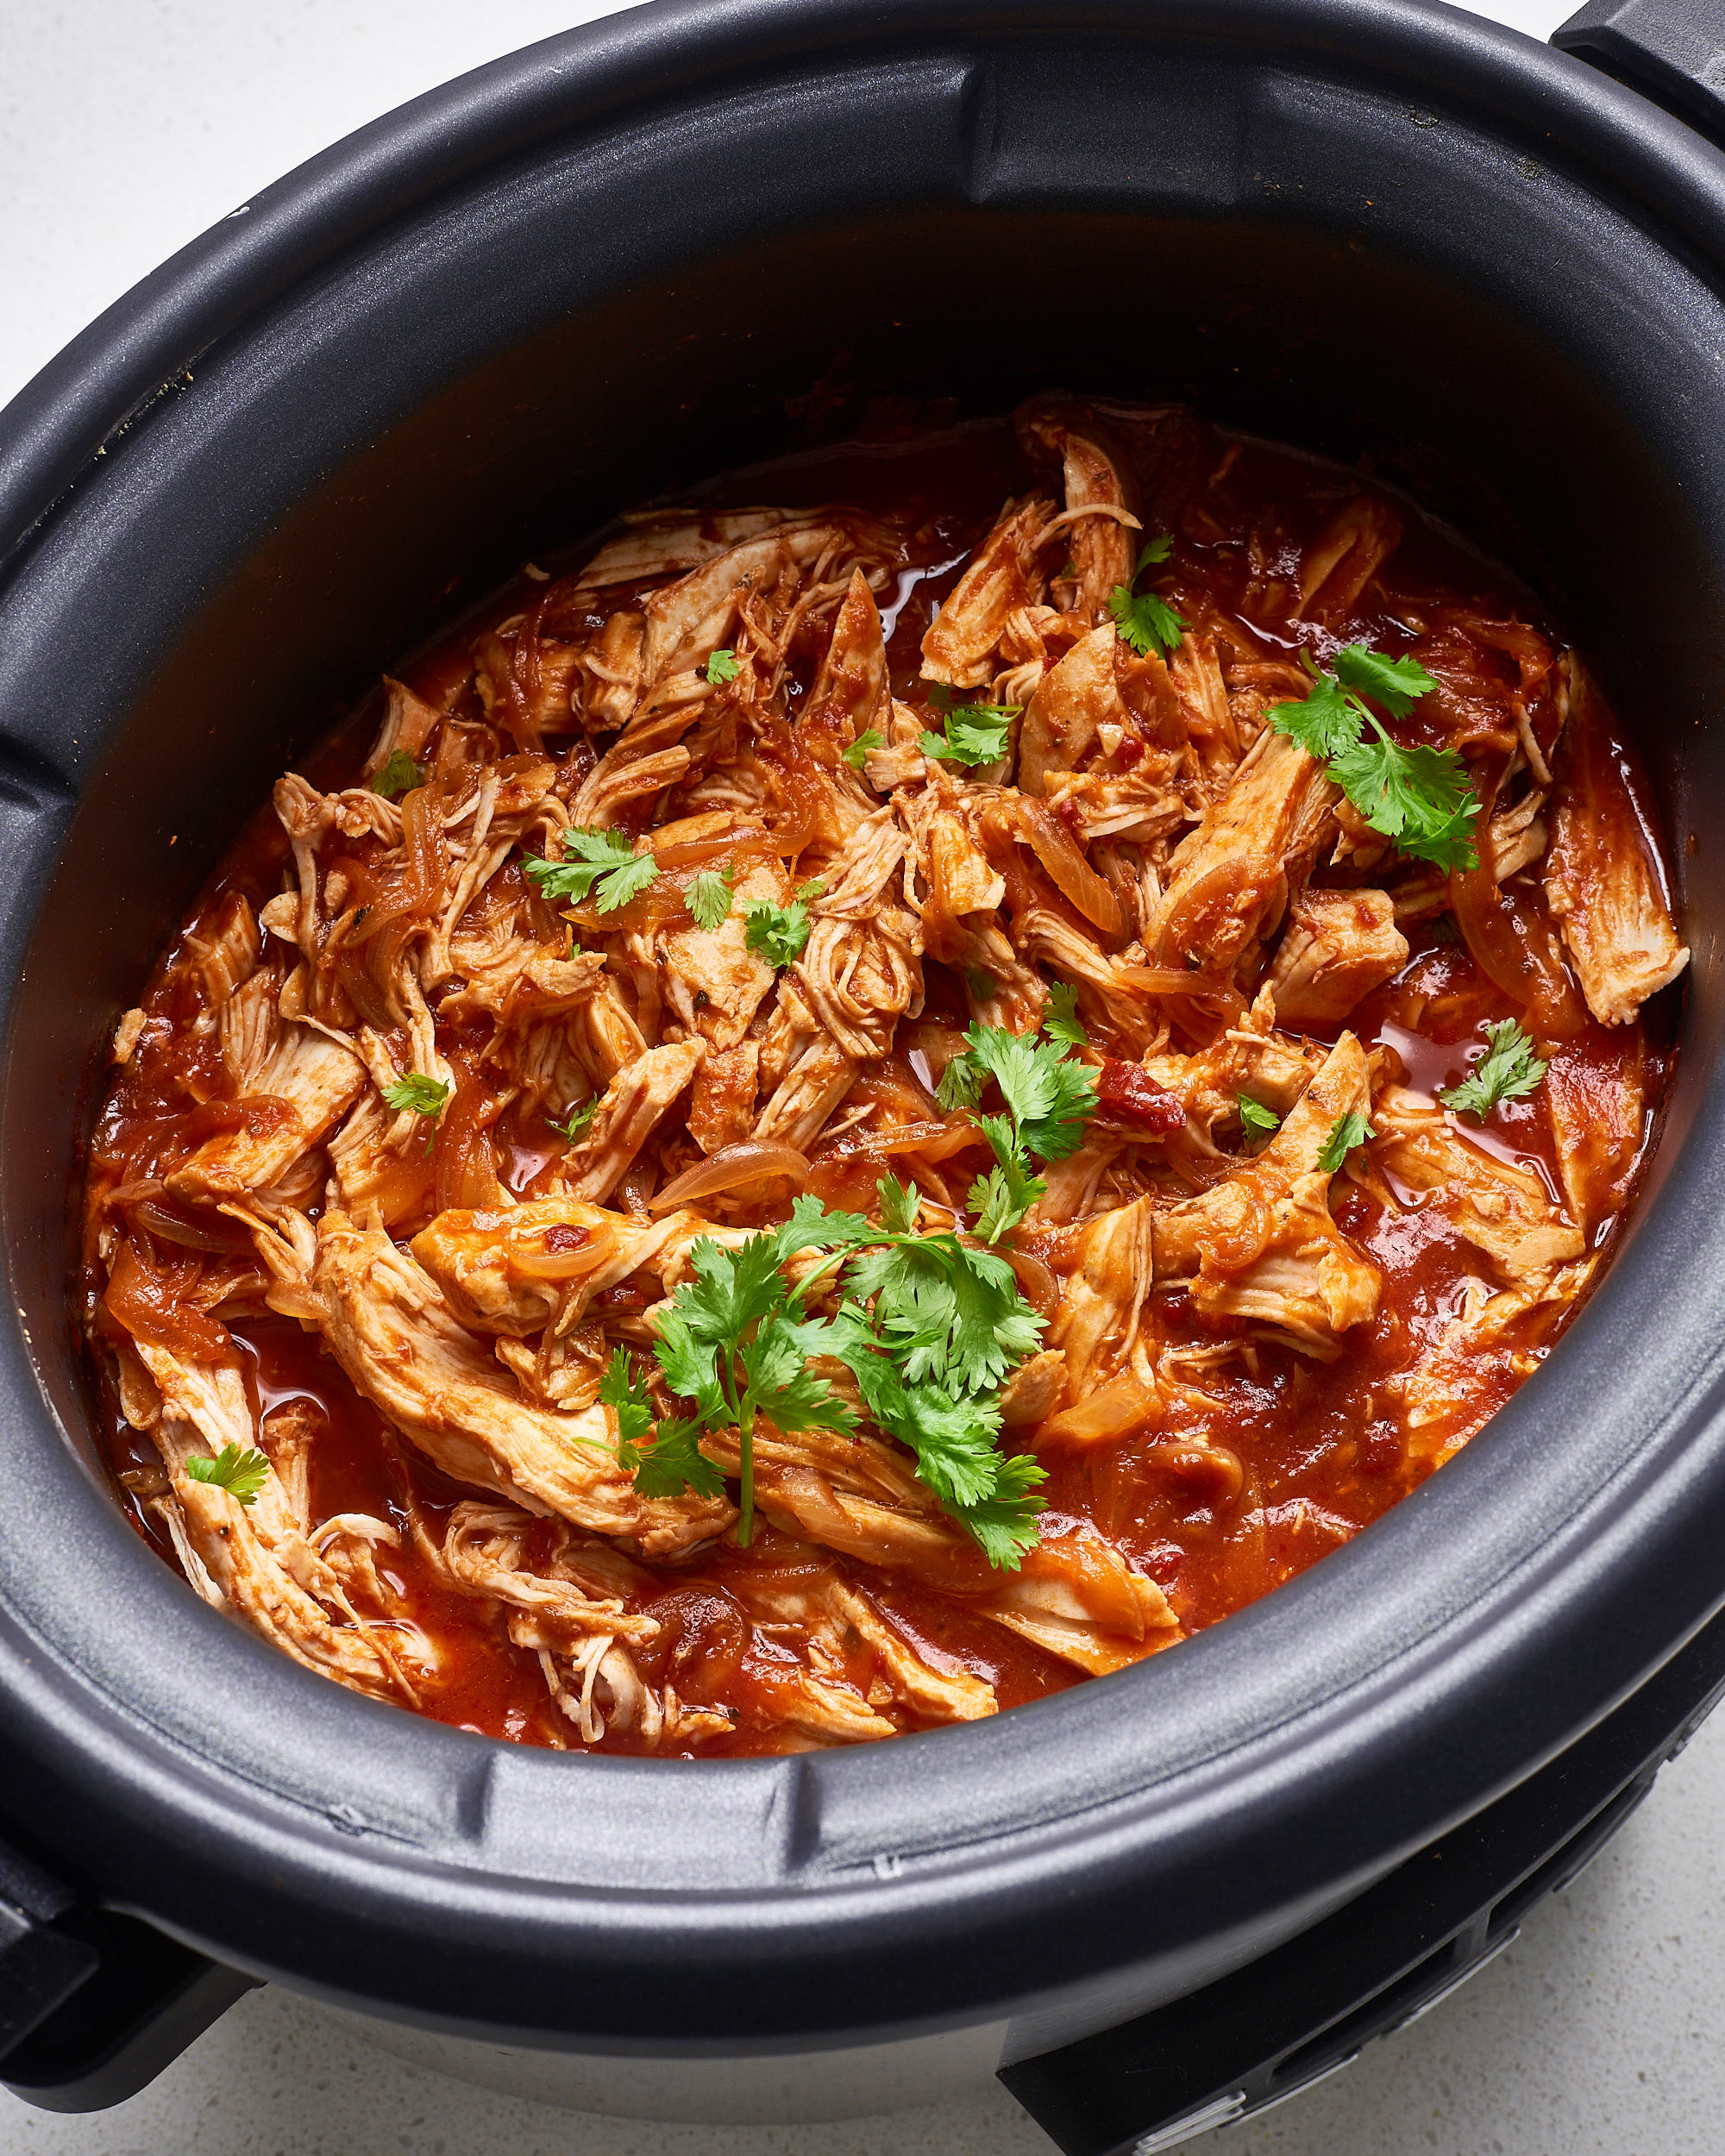 90+ Best Slow Cooker Recipes - Easy Dishes for a Crock Pot